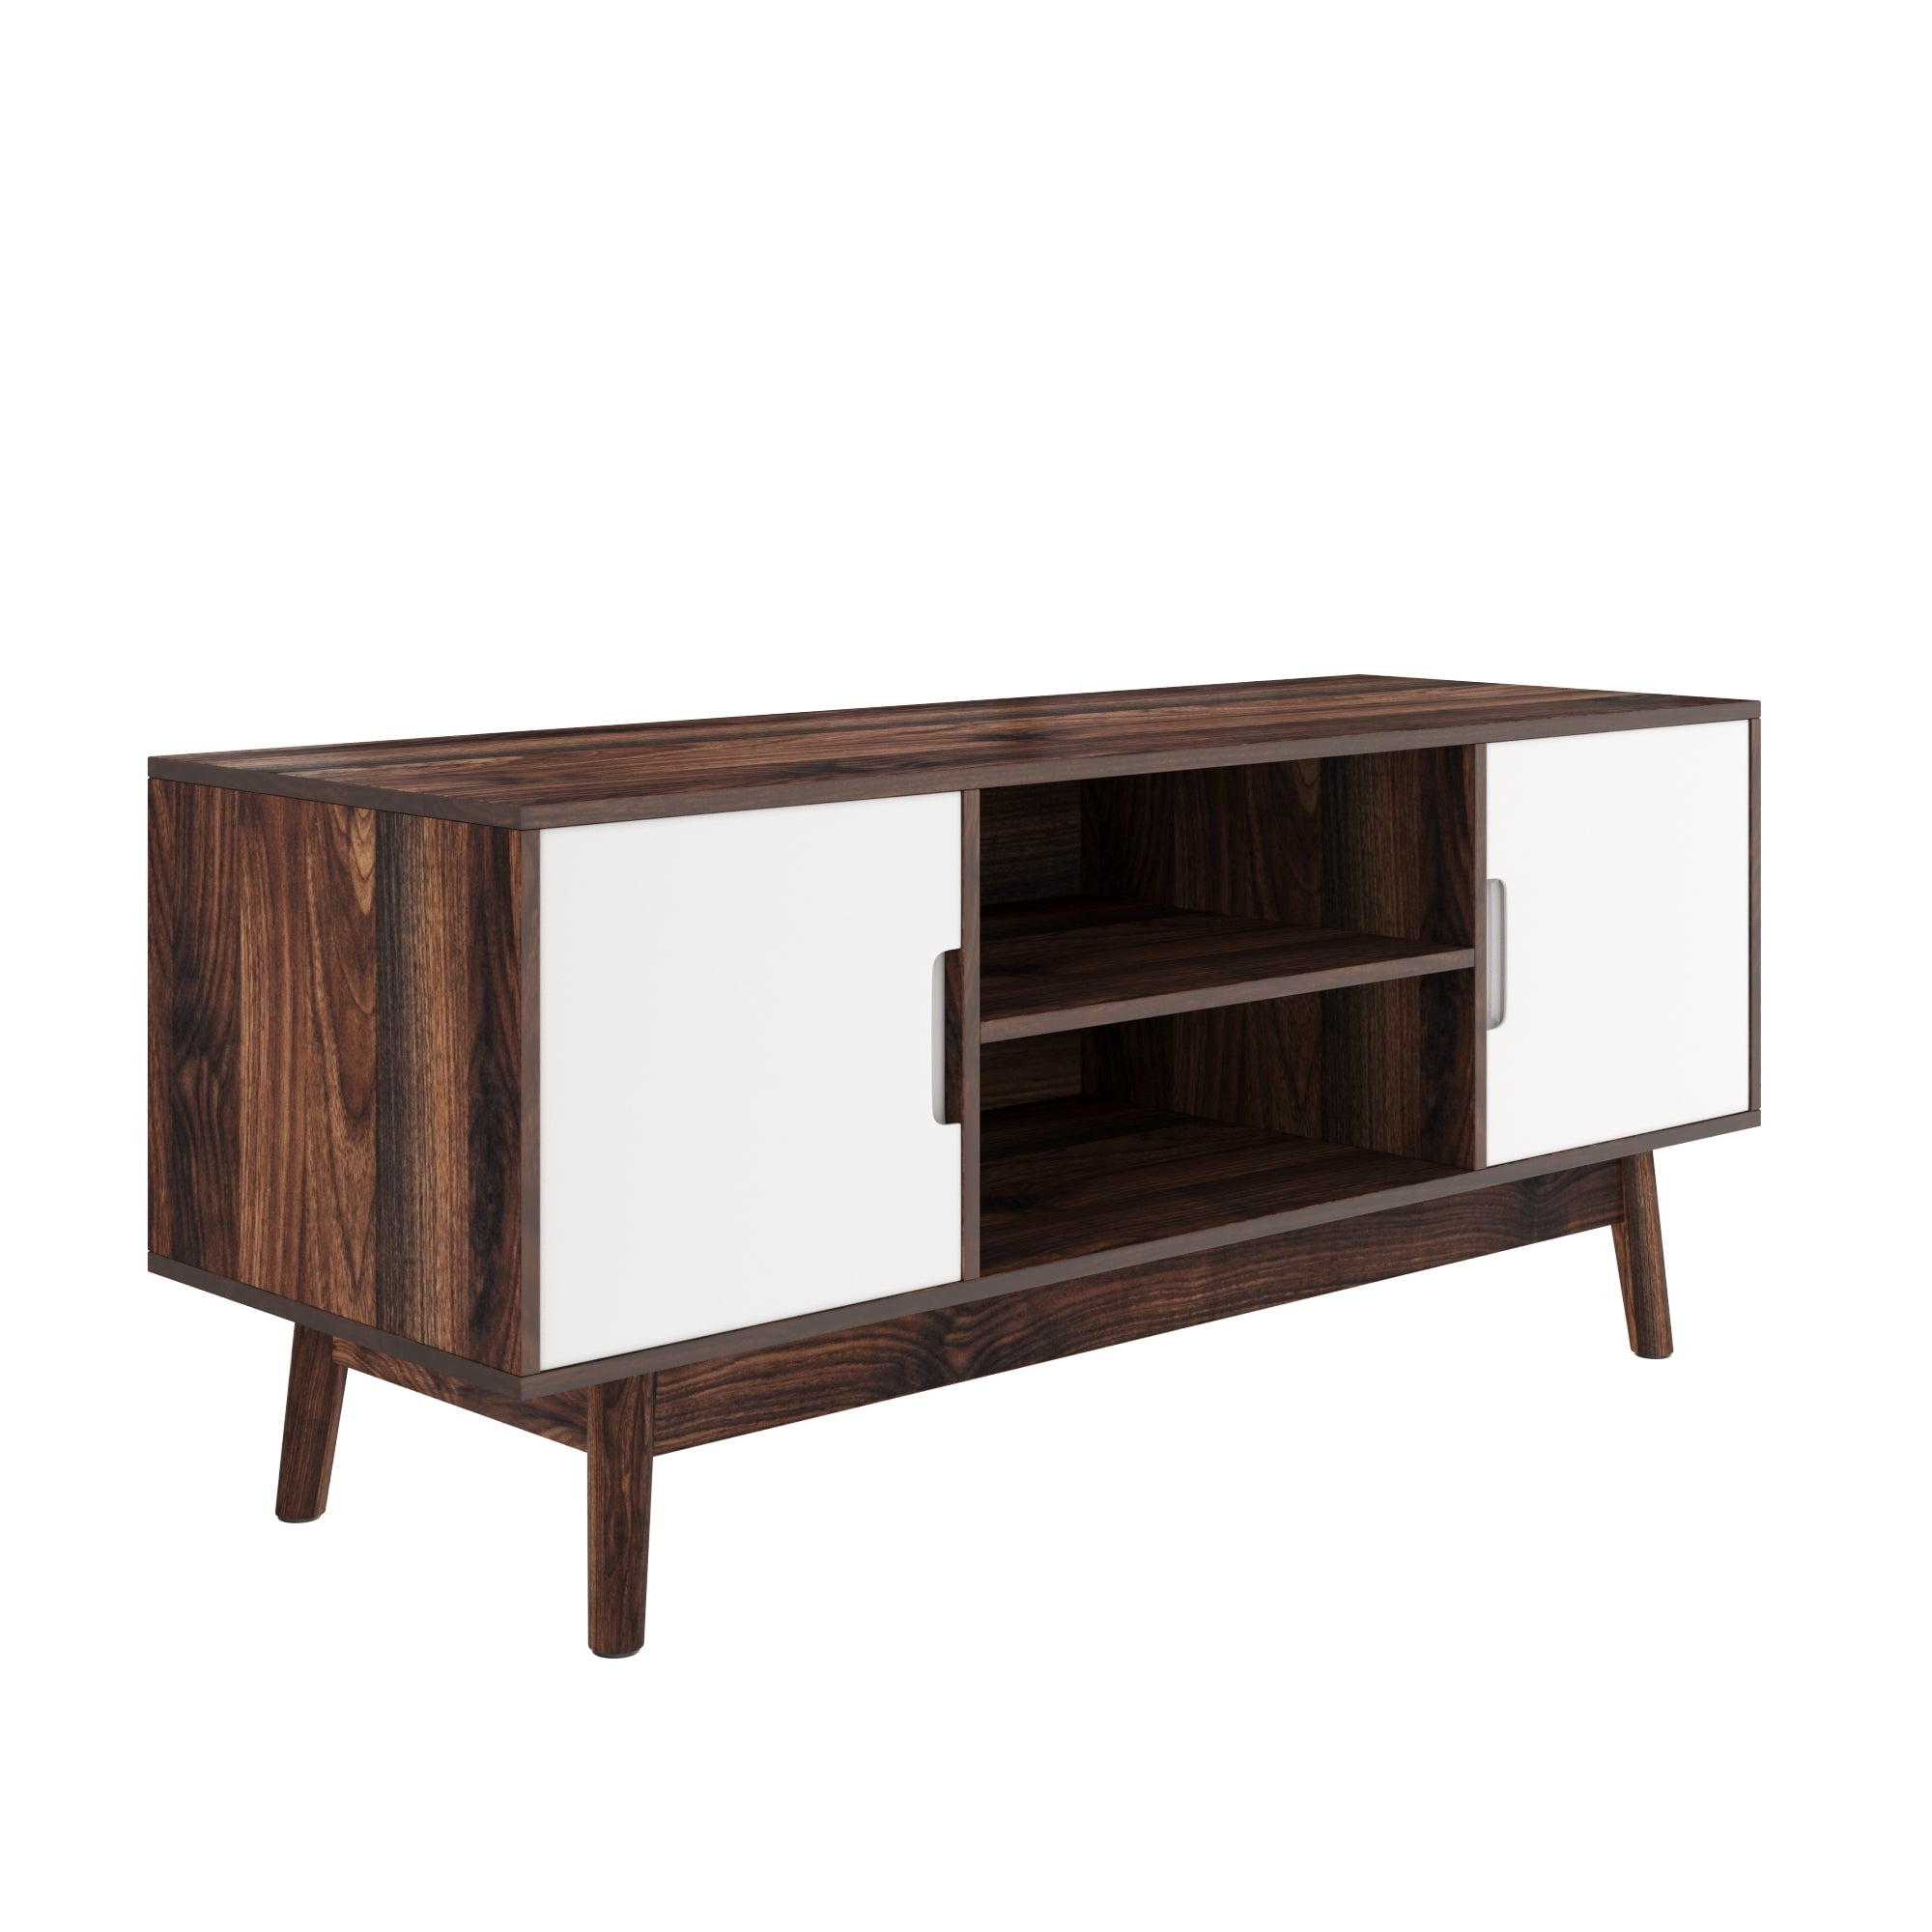 Nathan James Wesley Scandinavian TV Stand Media Console with Brown Frame and White Cabinet Doors